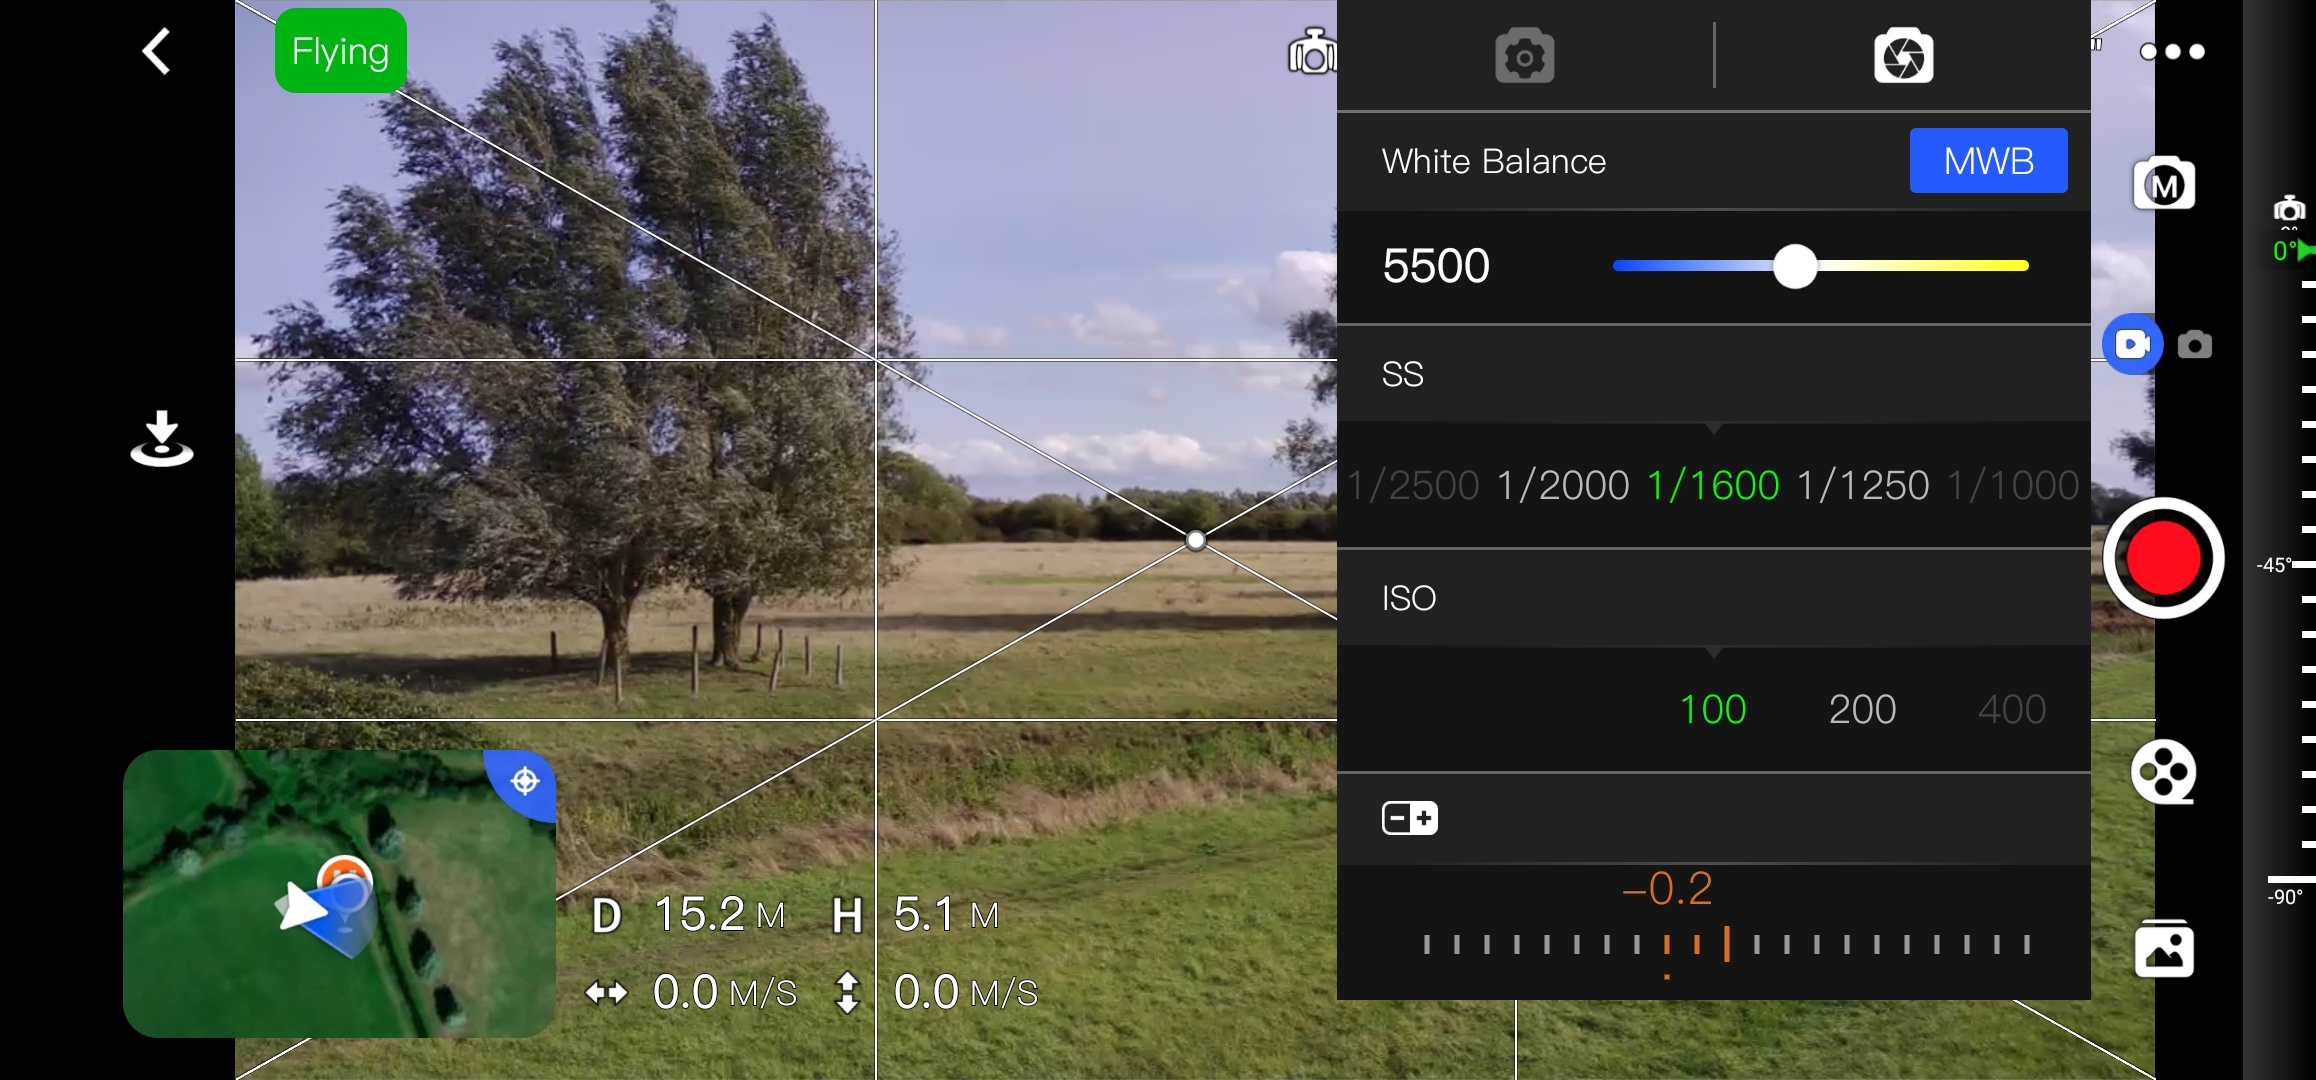 Screengrab from the Potensic Pro app for the Potensic Atom drone